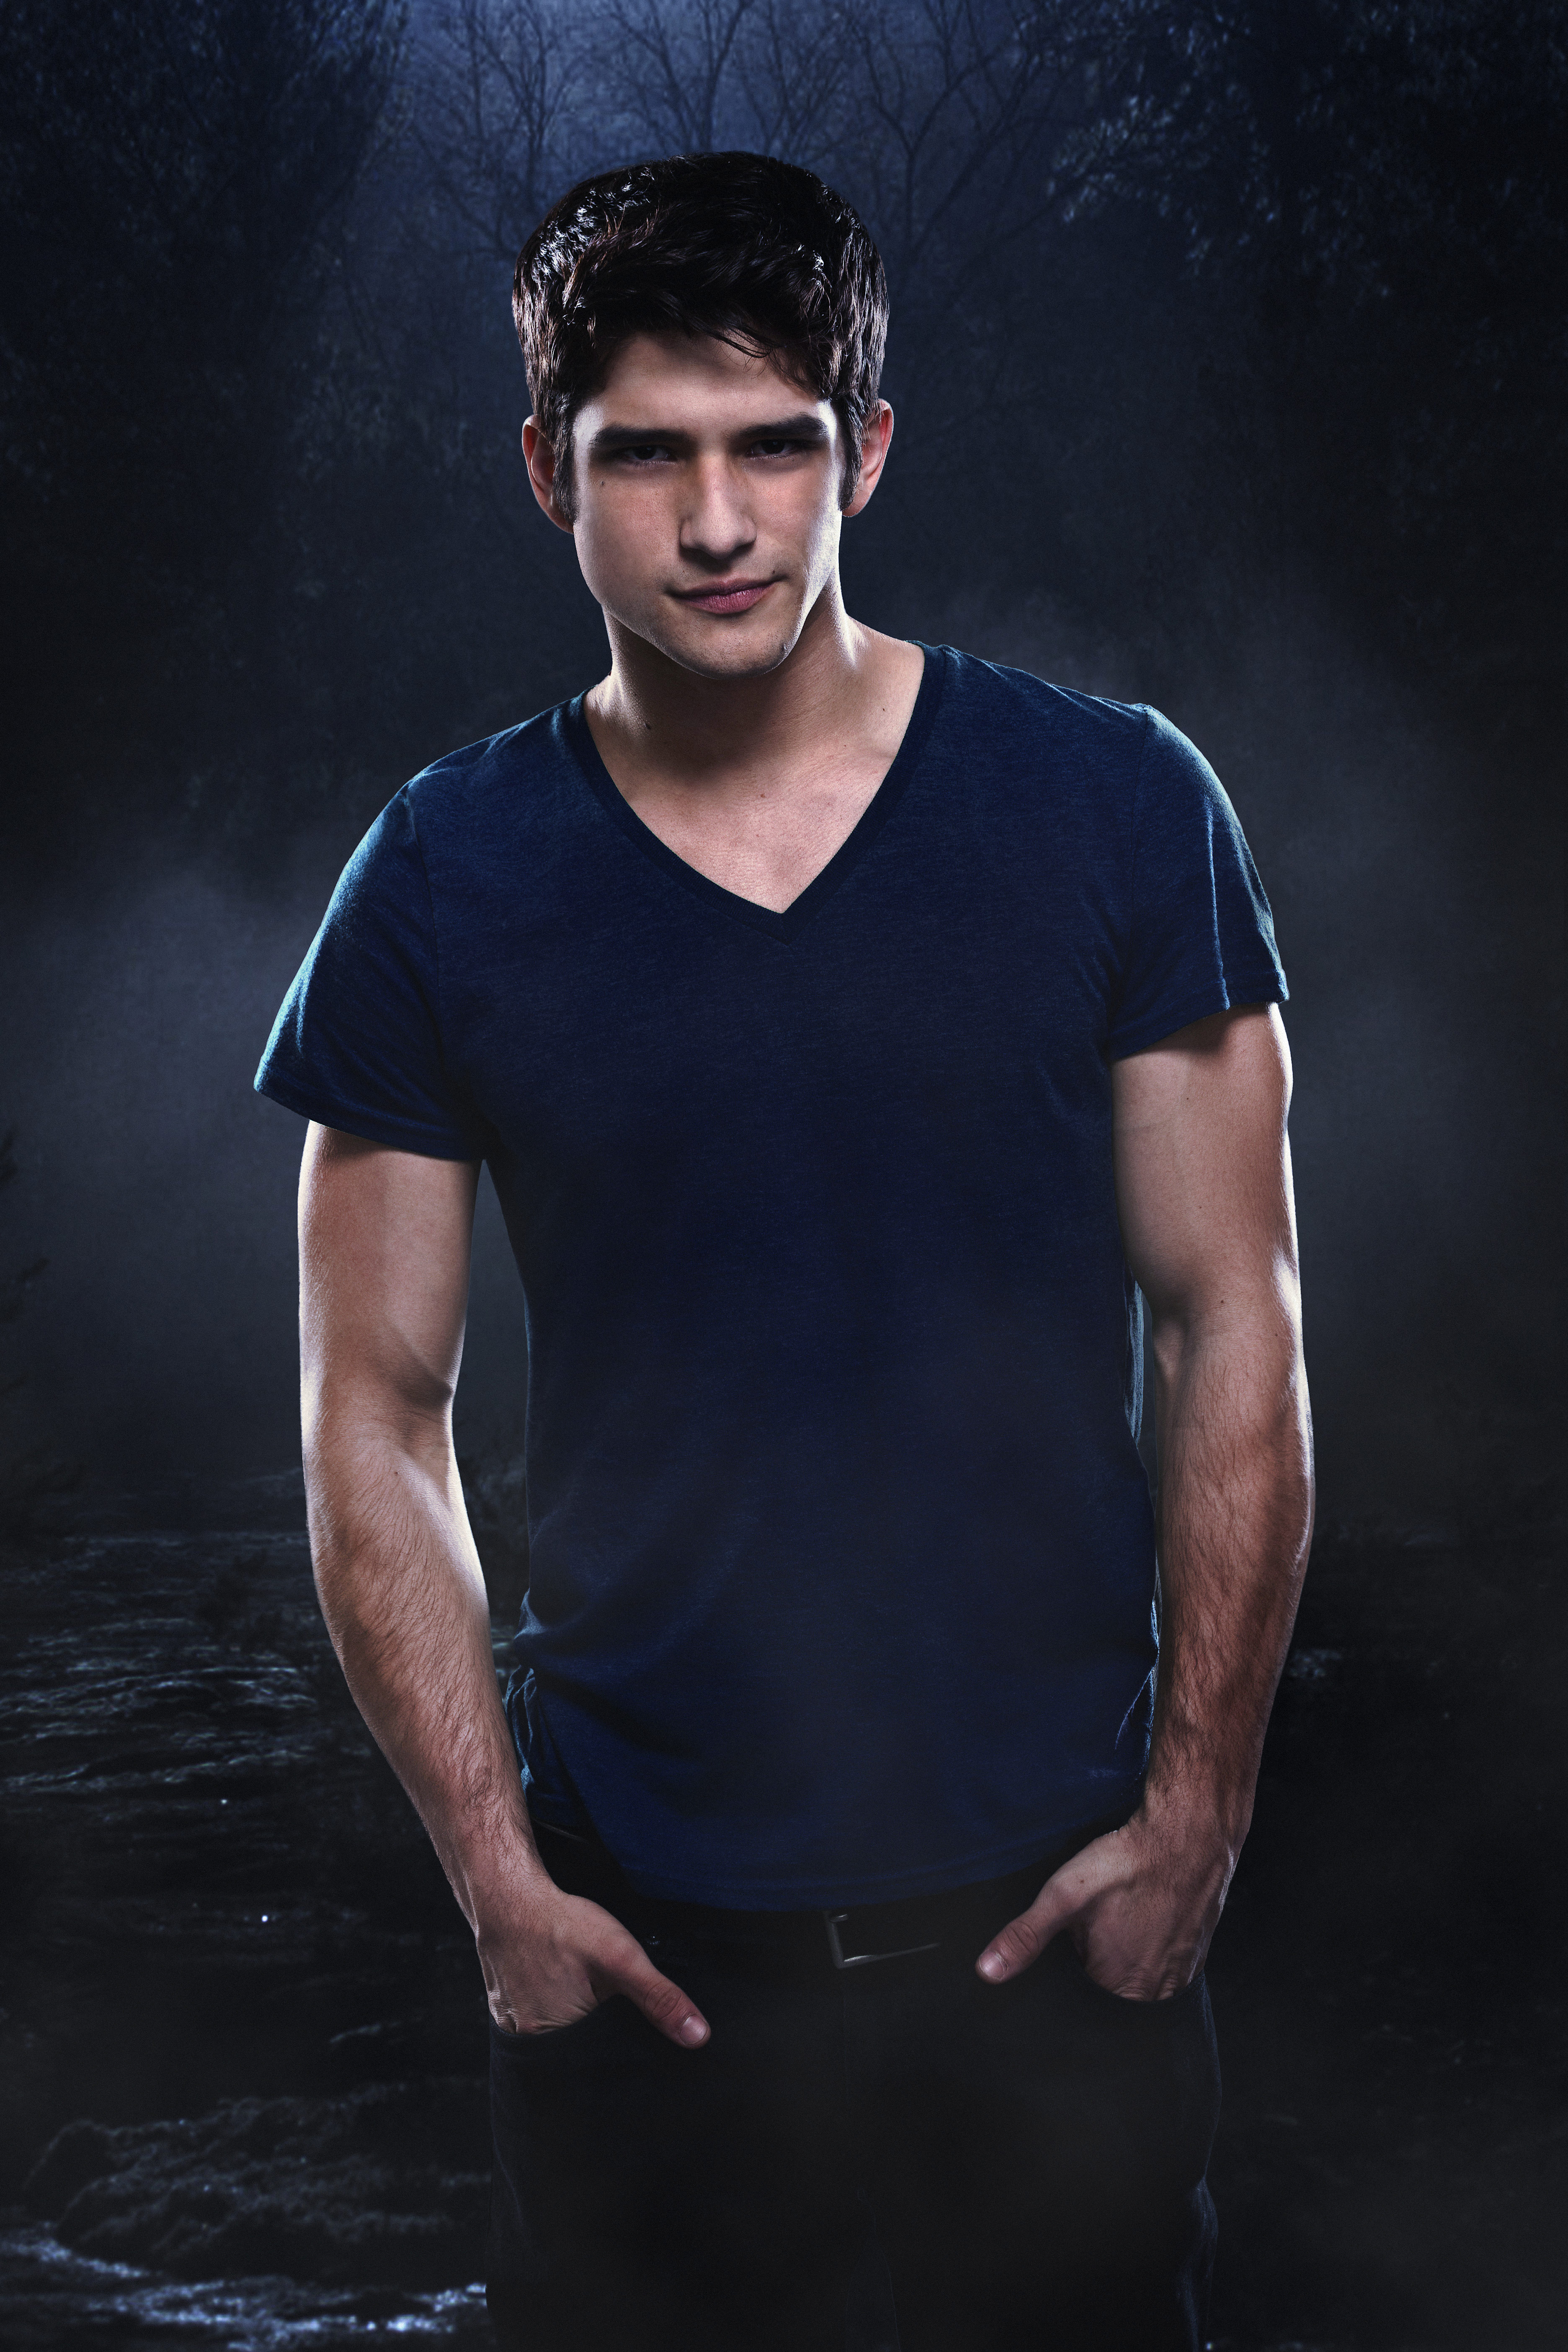 Pictures Of Scott Mccall Wallpapers